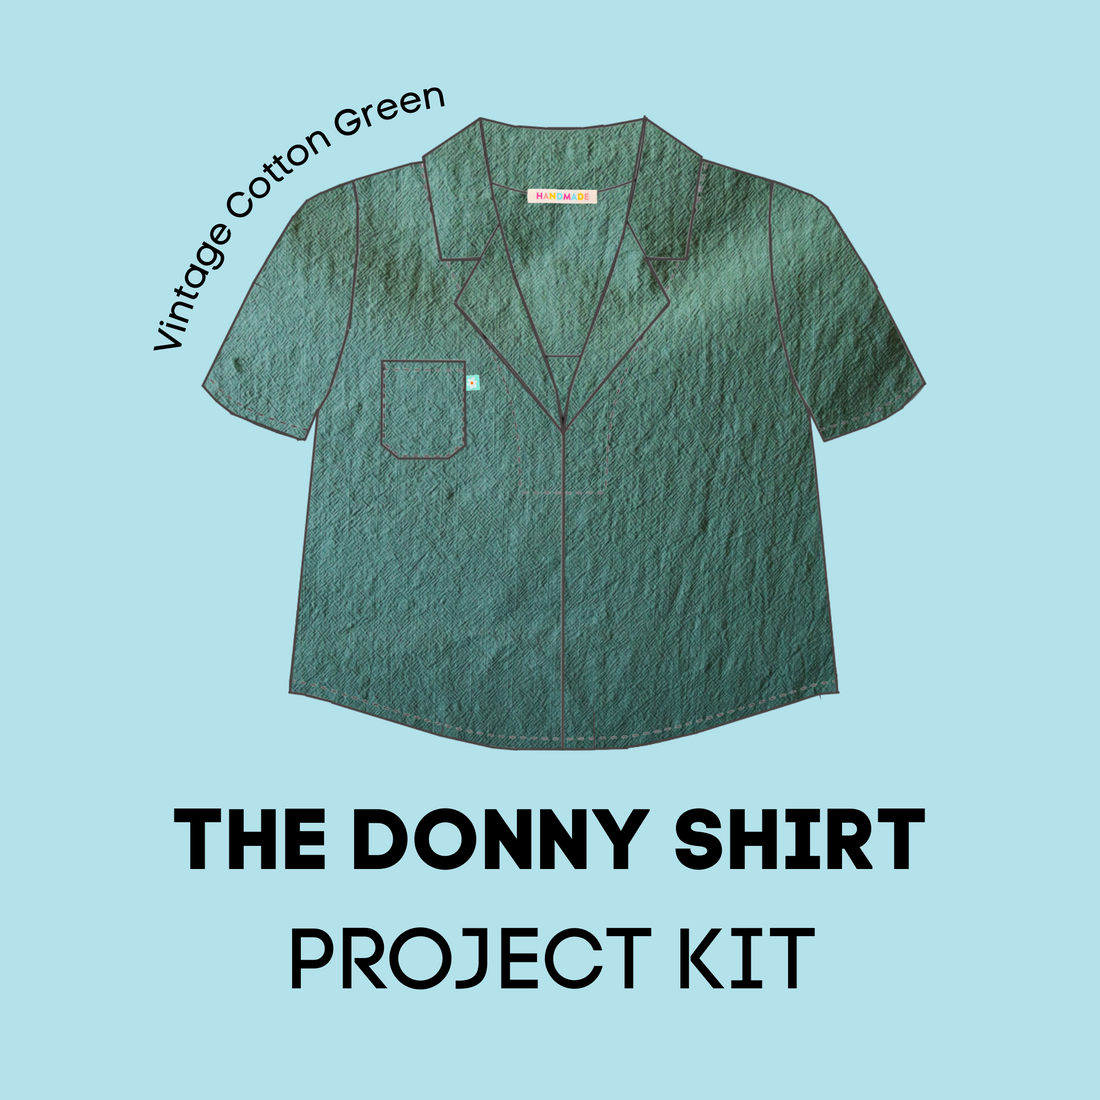 Sewing Project Kit - Green Vintage Cotton - Donny Shirt